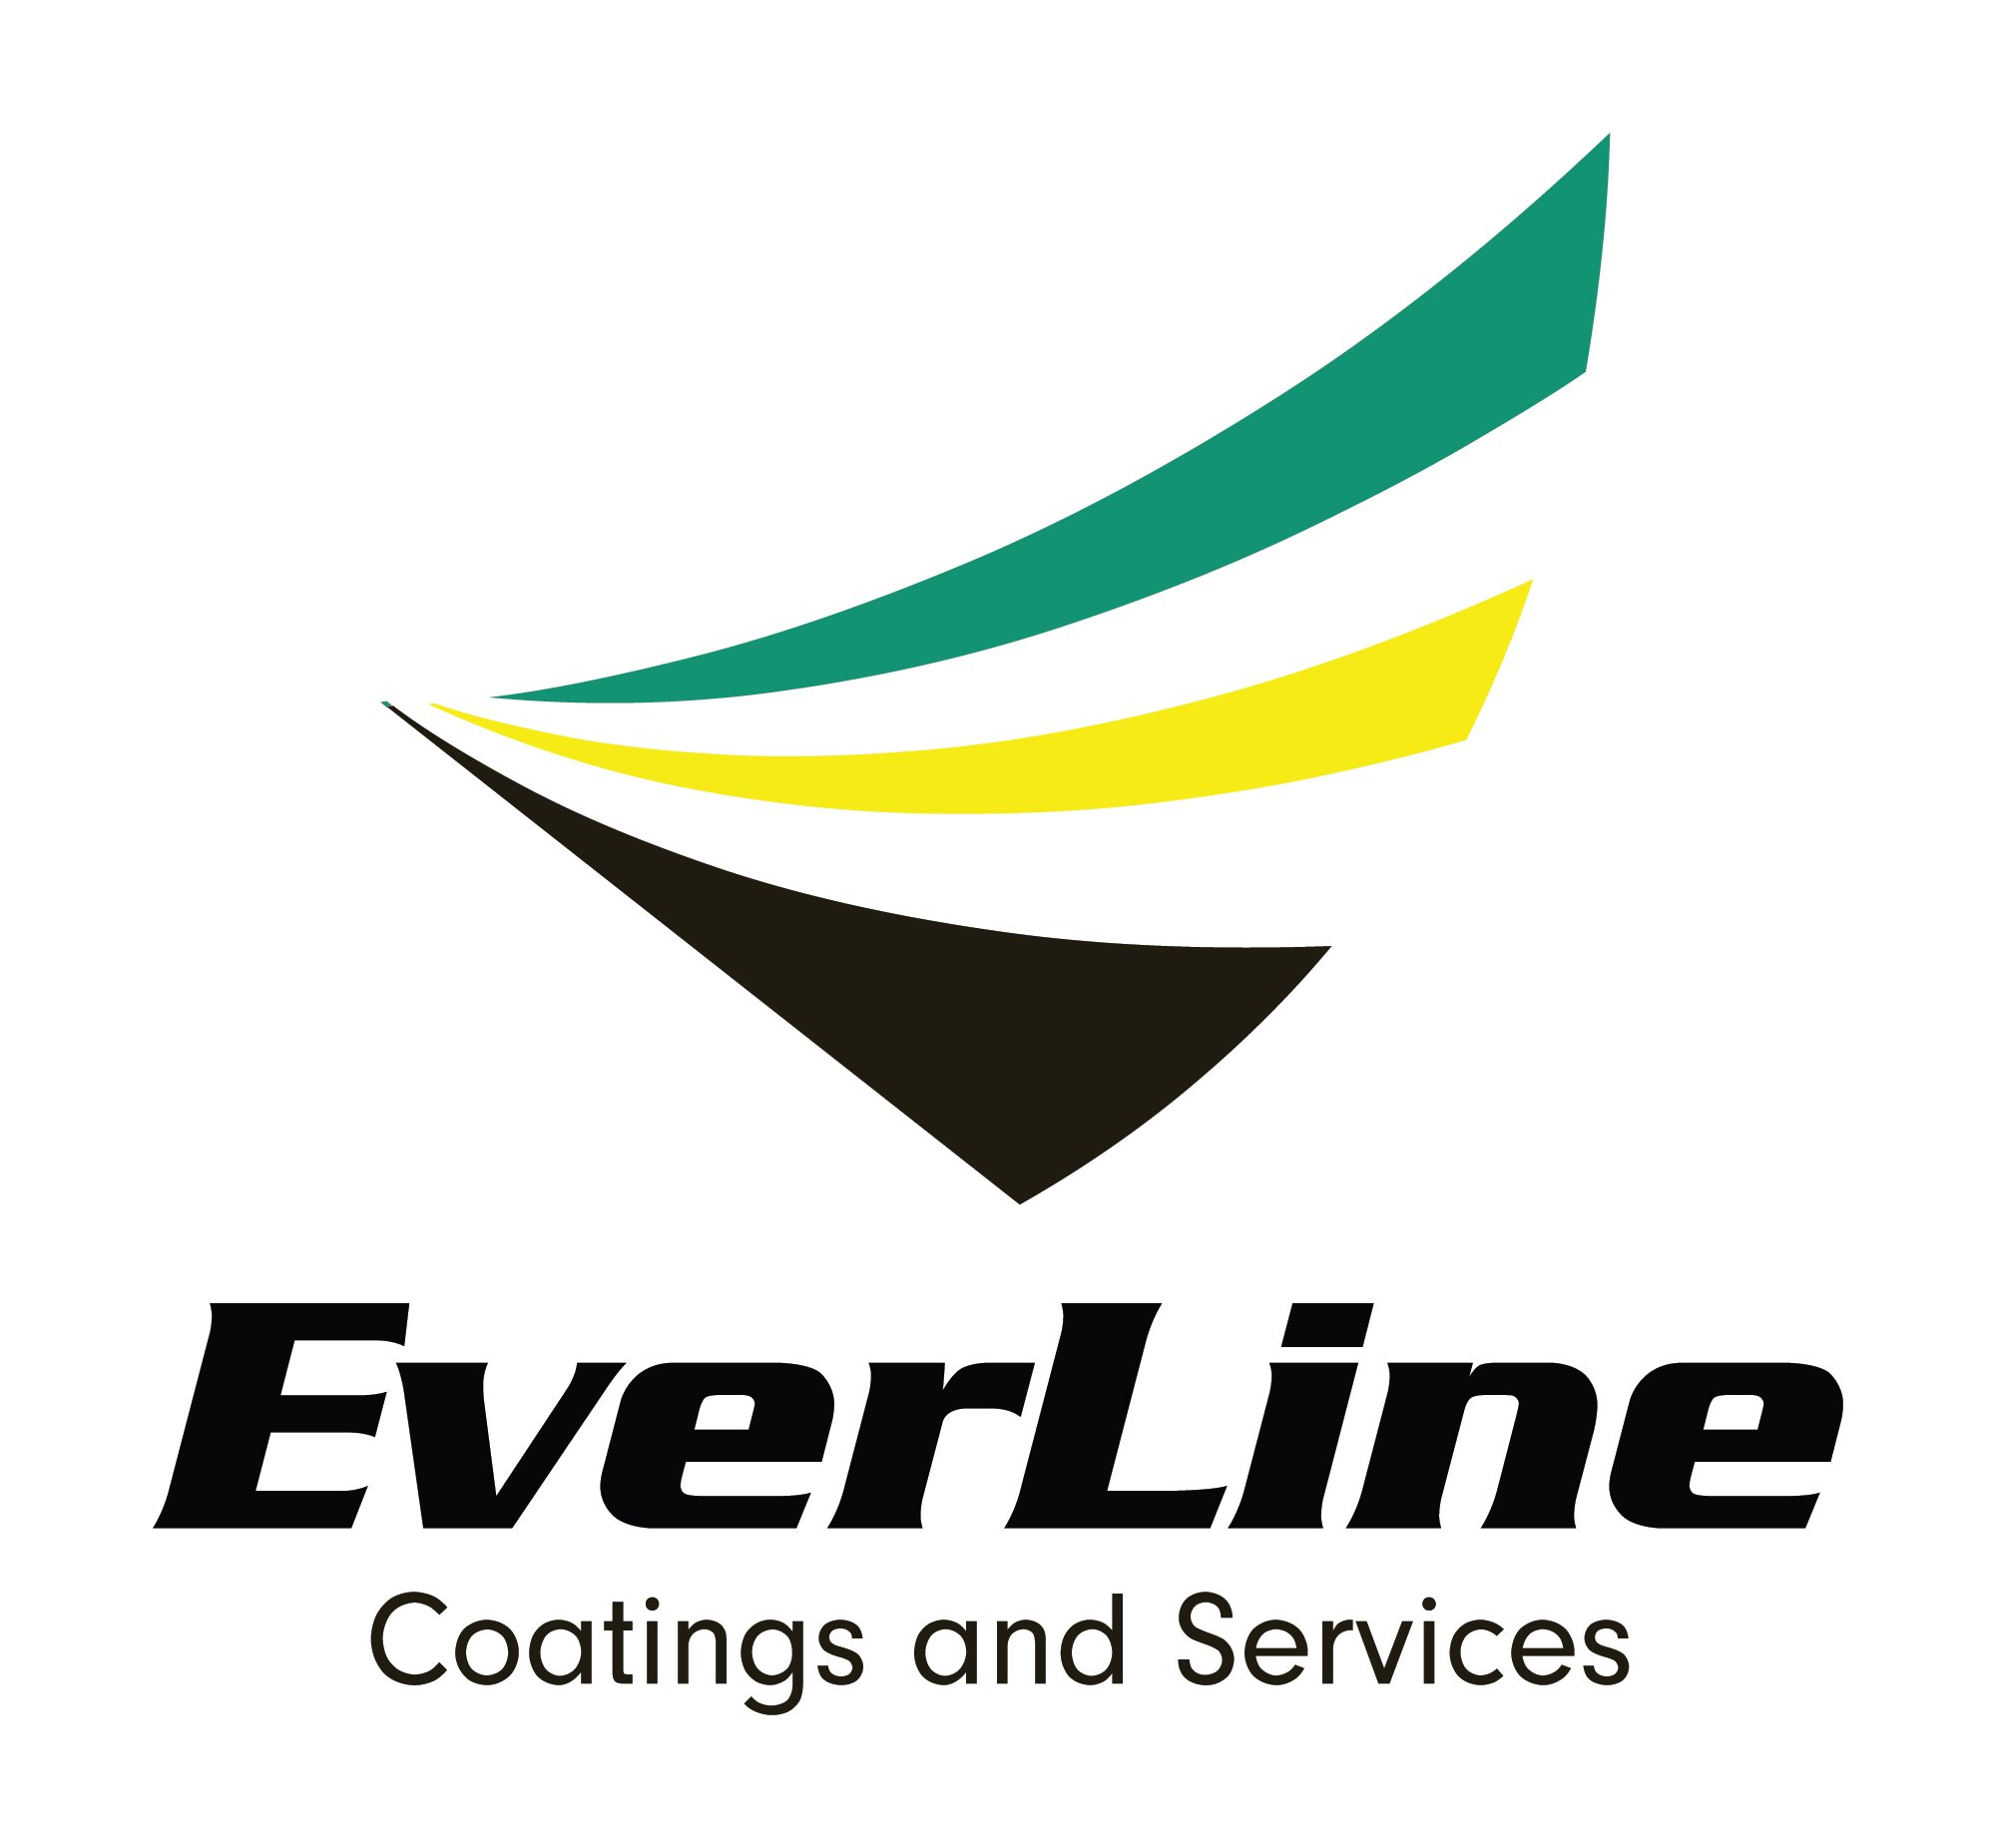 EverLine Coatings and Services - East Phoenix & Scottsdale Logo